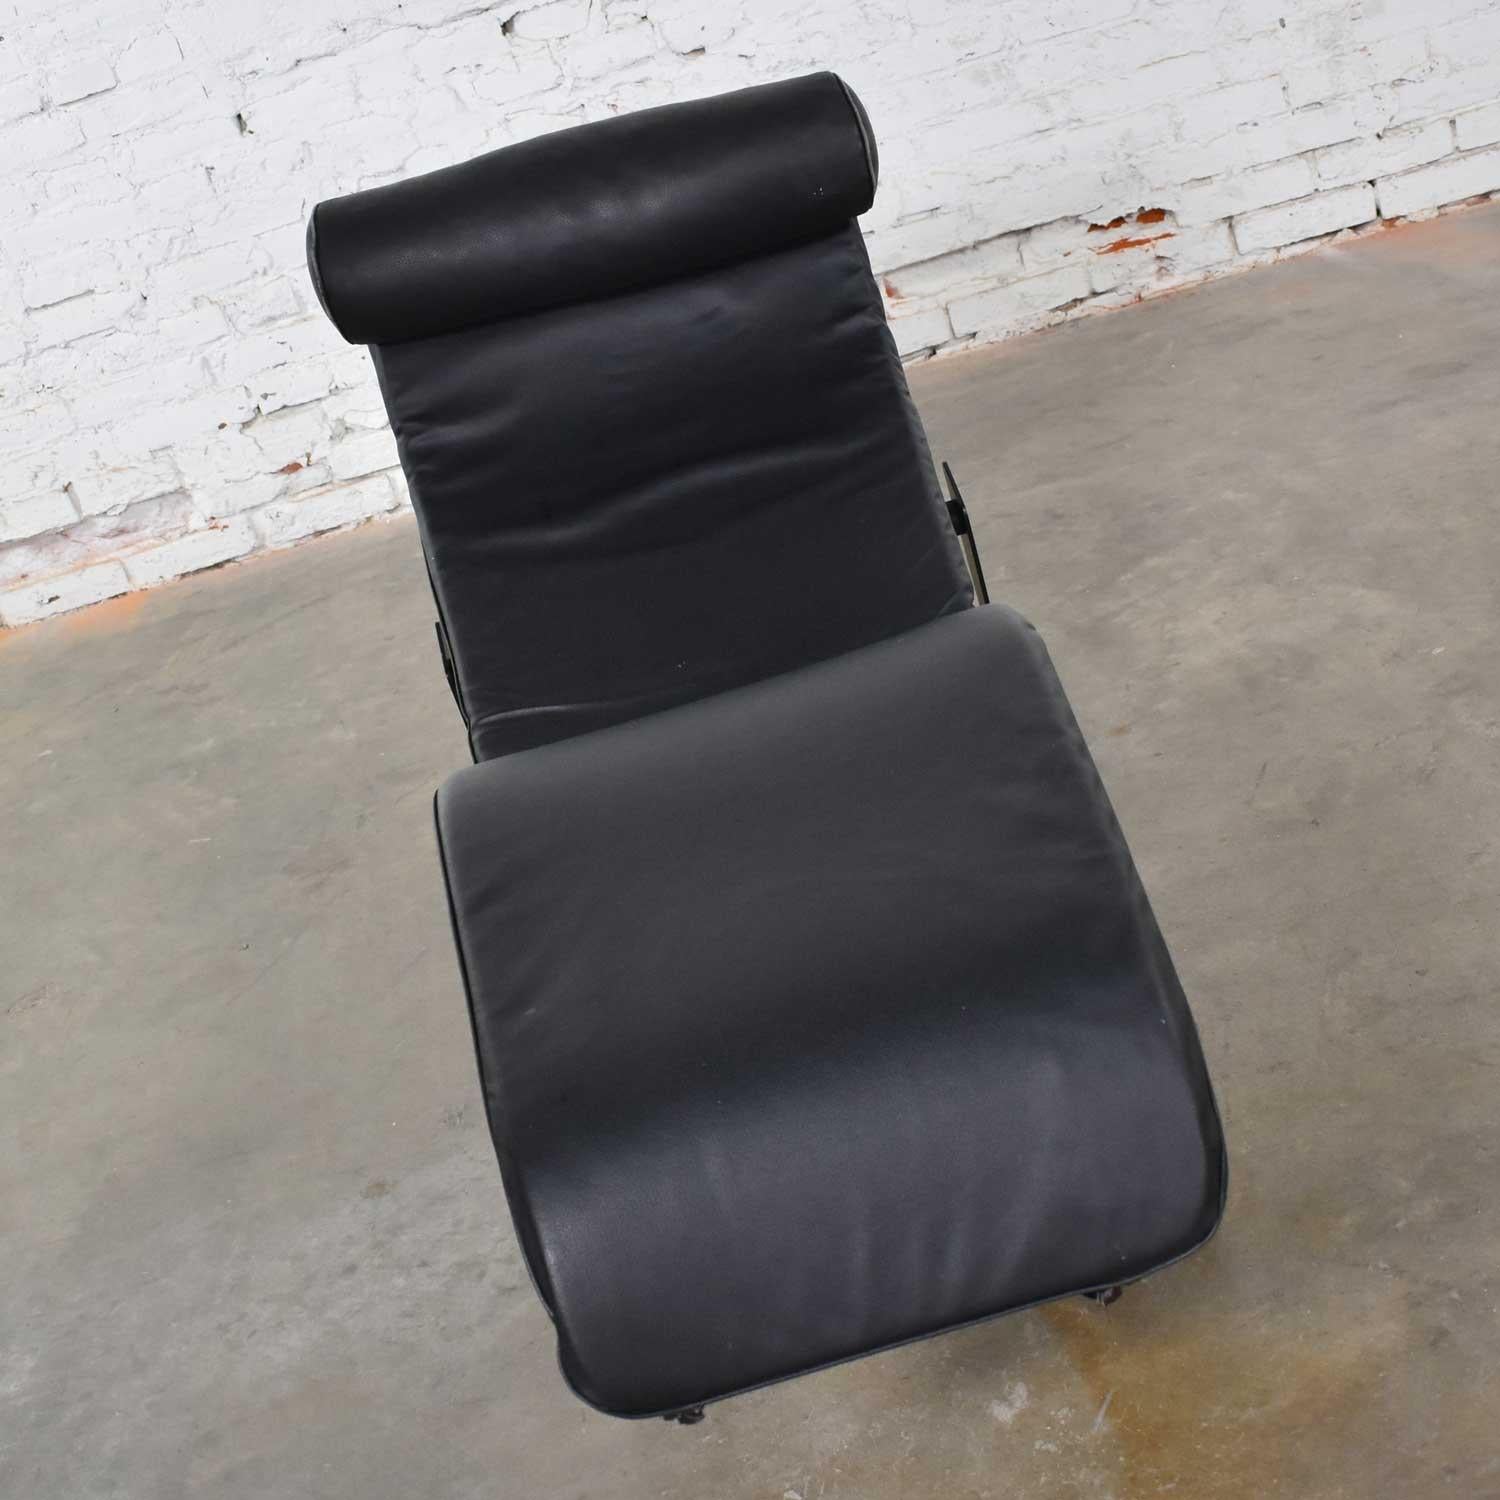 Bauhaus Le Corbusier LC4 Style Chaise Lounge with Black Leather Cushion by Unknown Maker